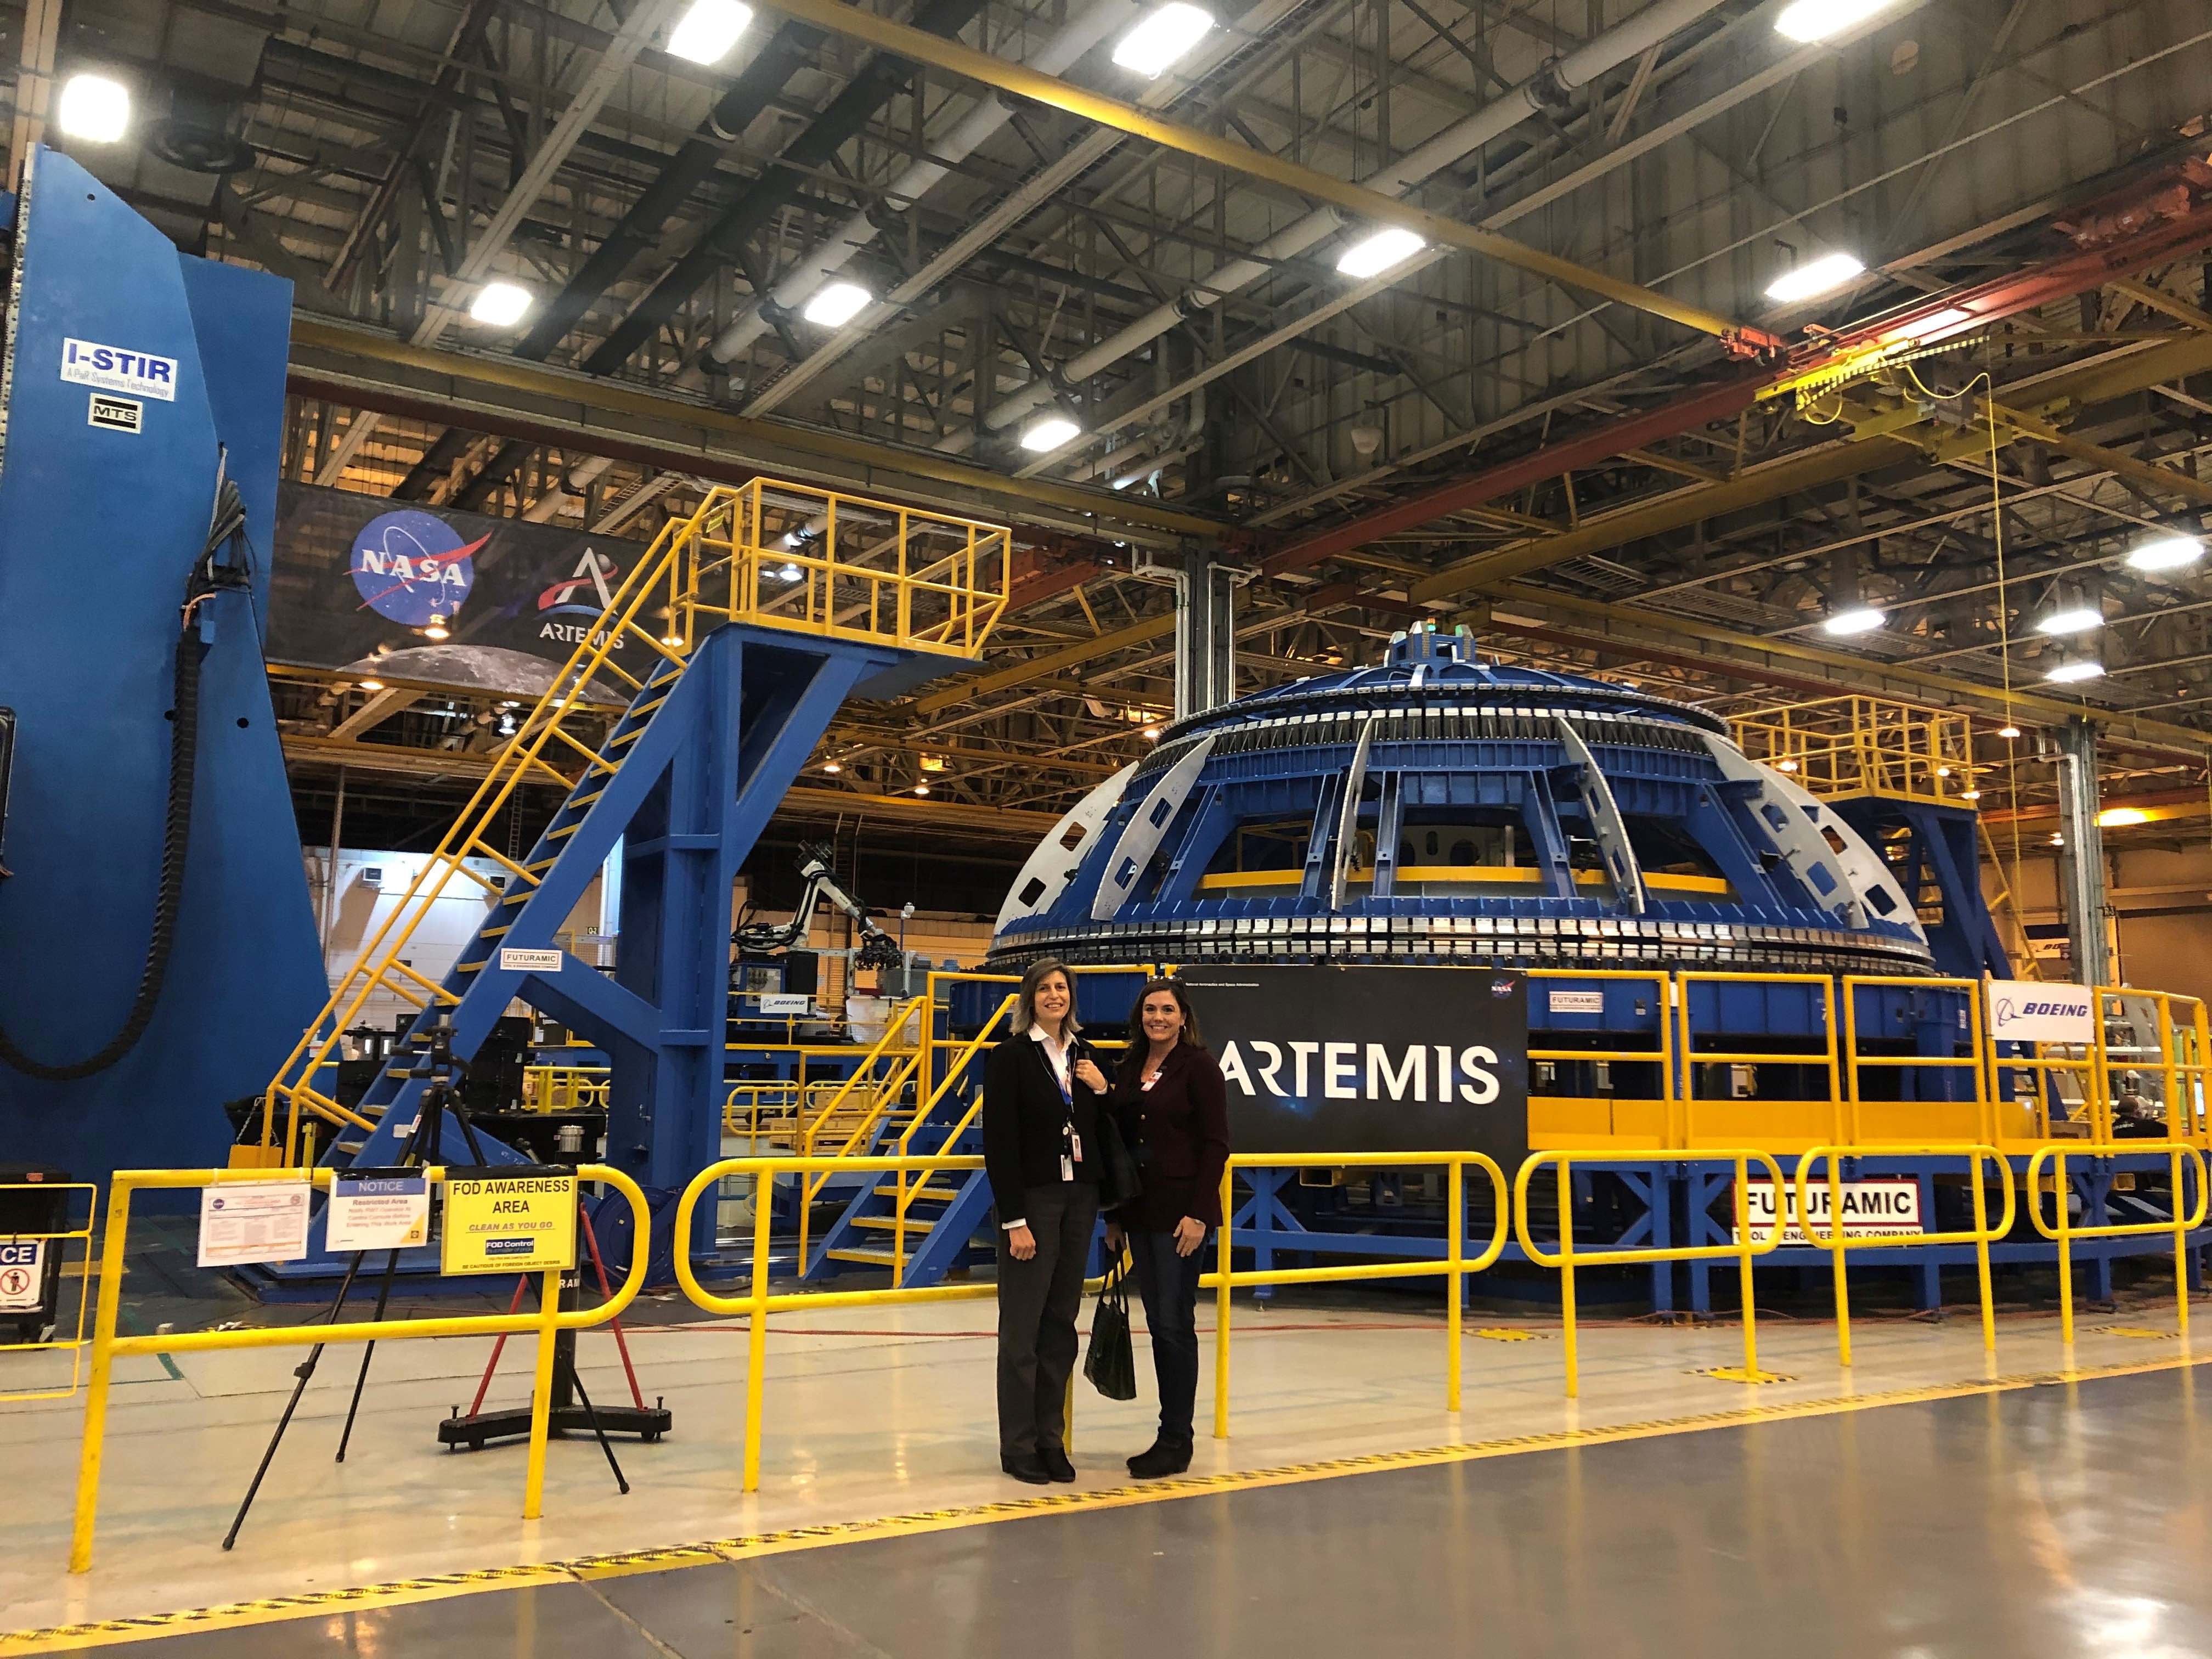 Michele Wilson and a fellow Davidson employee in front of a friction-stir welding fixture used to construct the dome ends on the LOX and Fuel tanks inside the Artemis rocket core stage at NASA’s Michoud Assembly Facility in New Orleans.